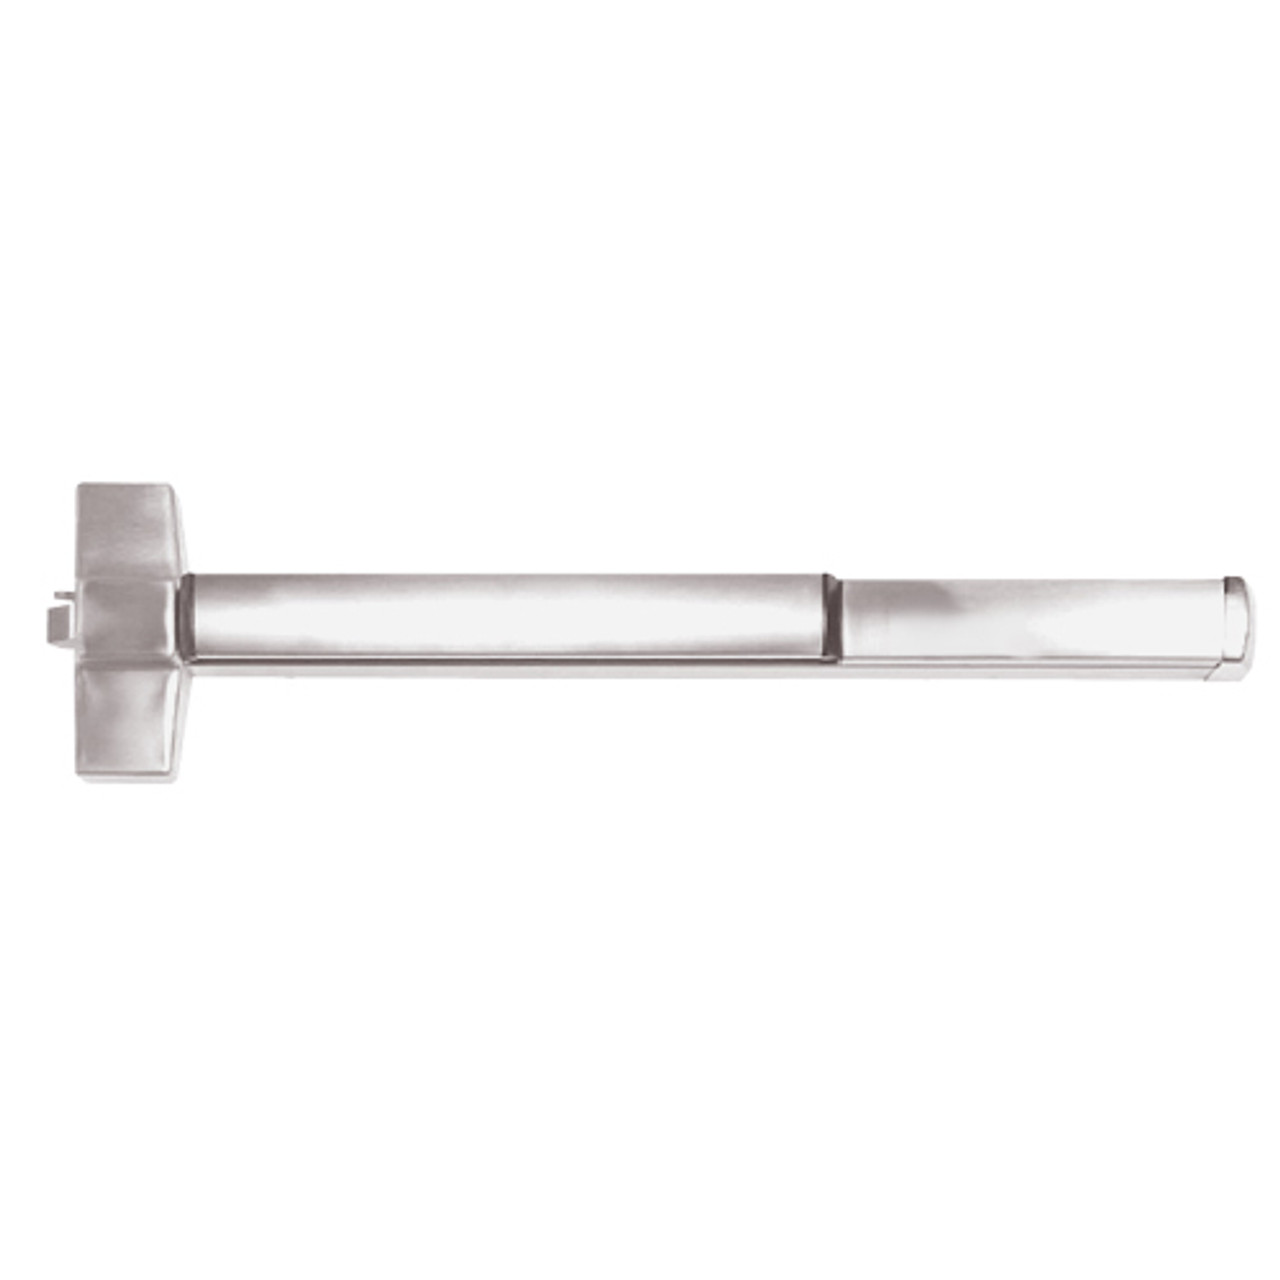 ED5200A-630-MELR Corbin ED5200 Series Fire Rated Rim Exit Device with Motor Latch Retraction in Satin Stainless Steel Finish